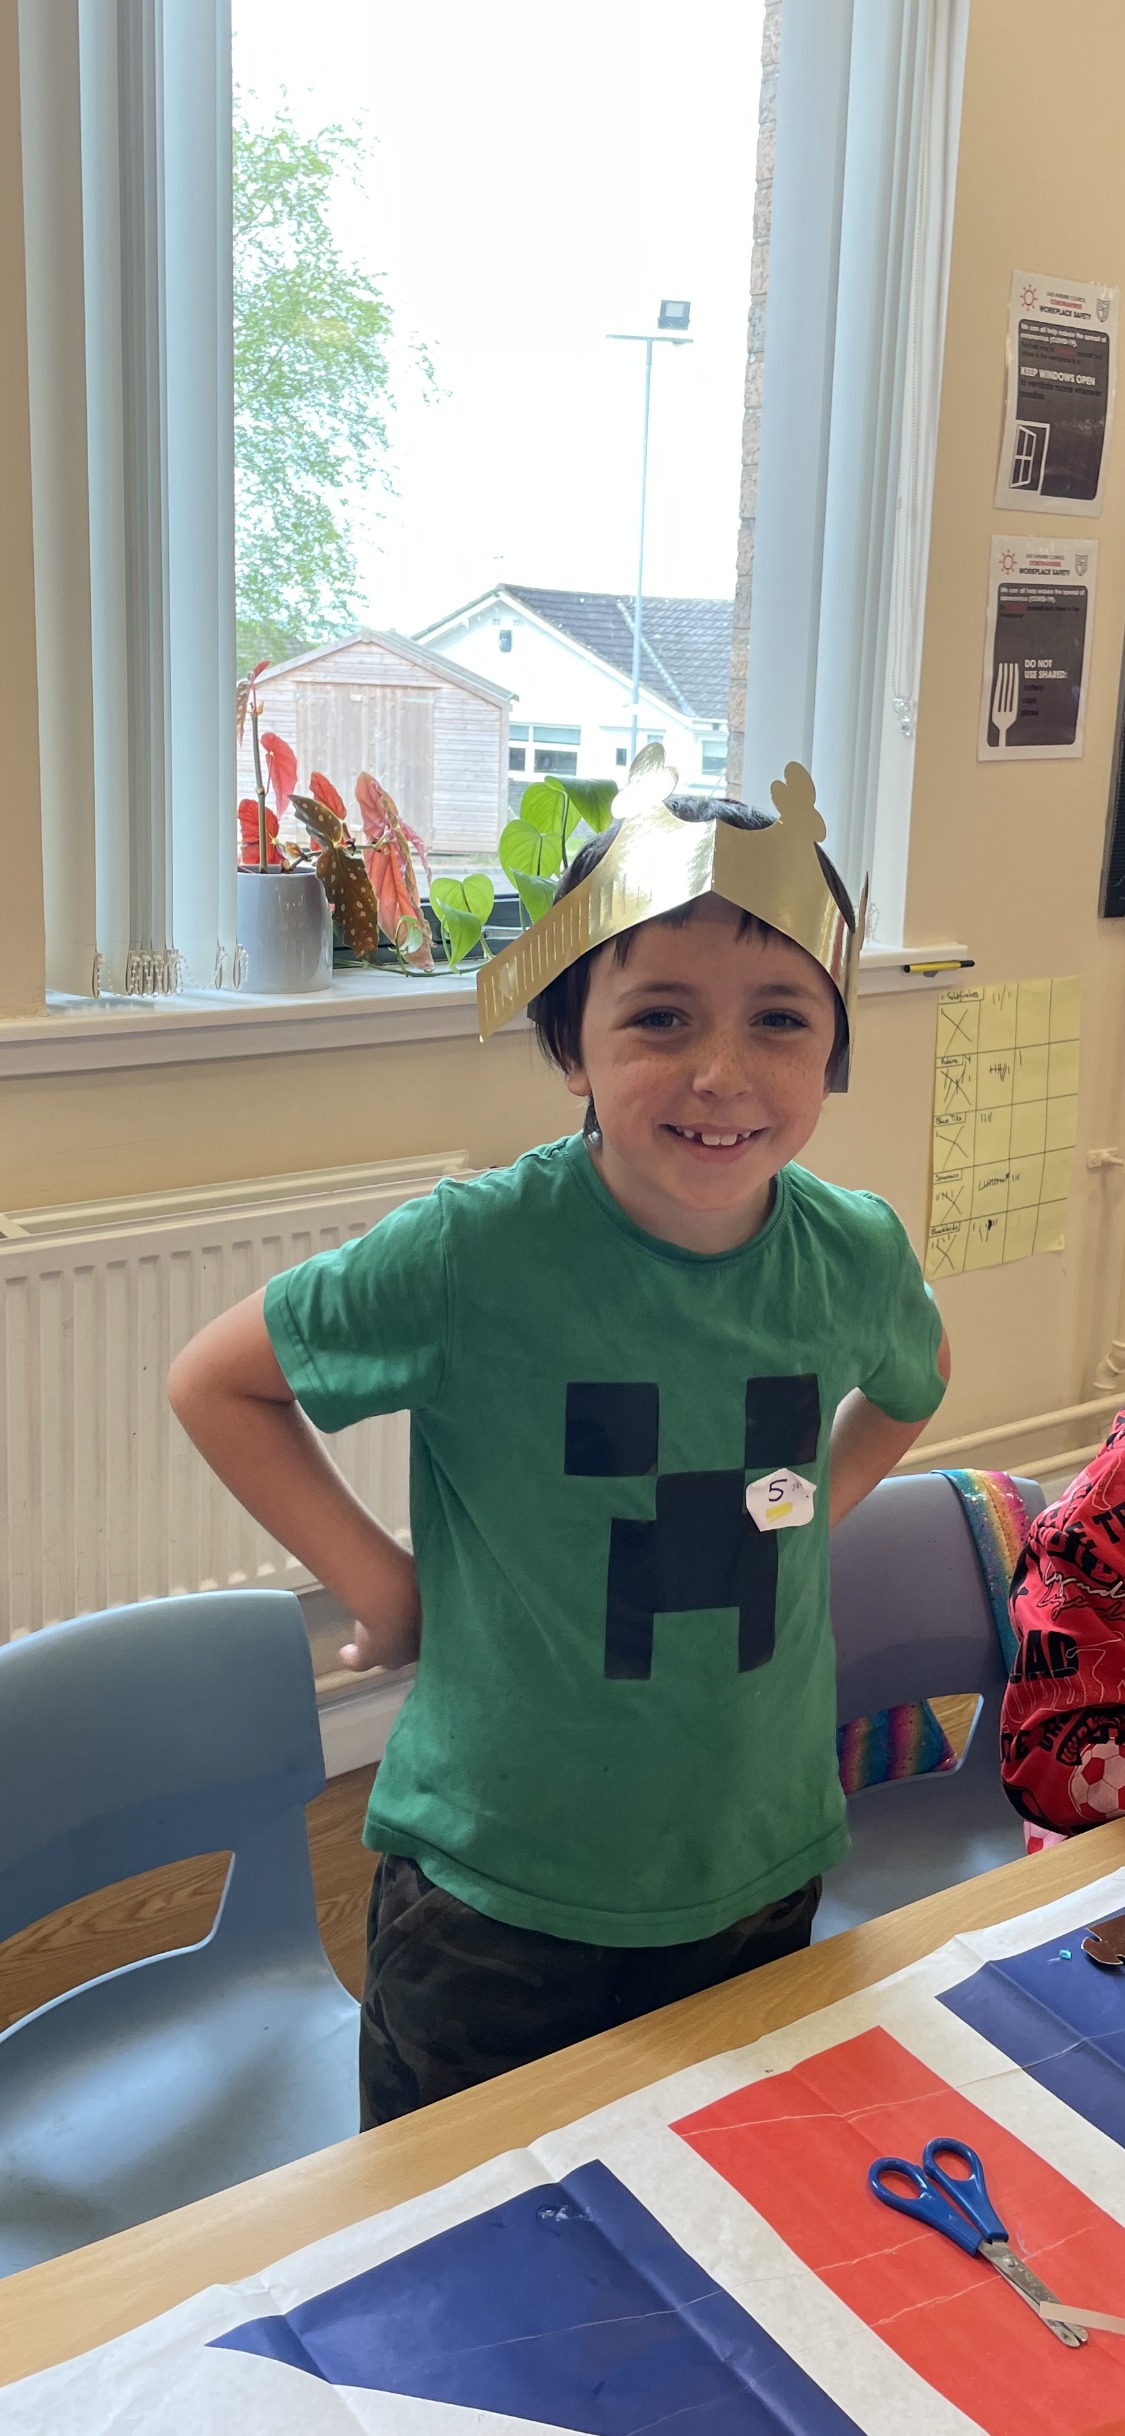 King for the Day at Auchinleck Primary